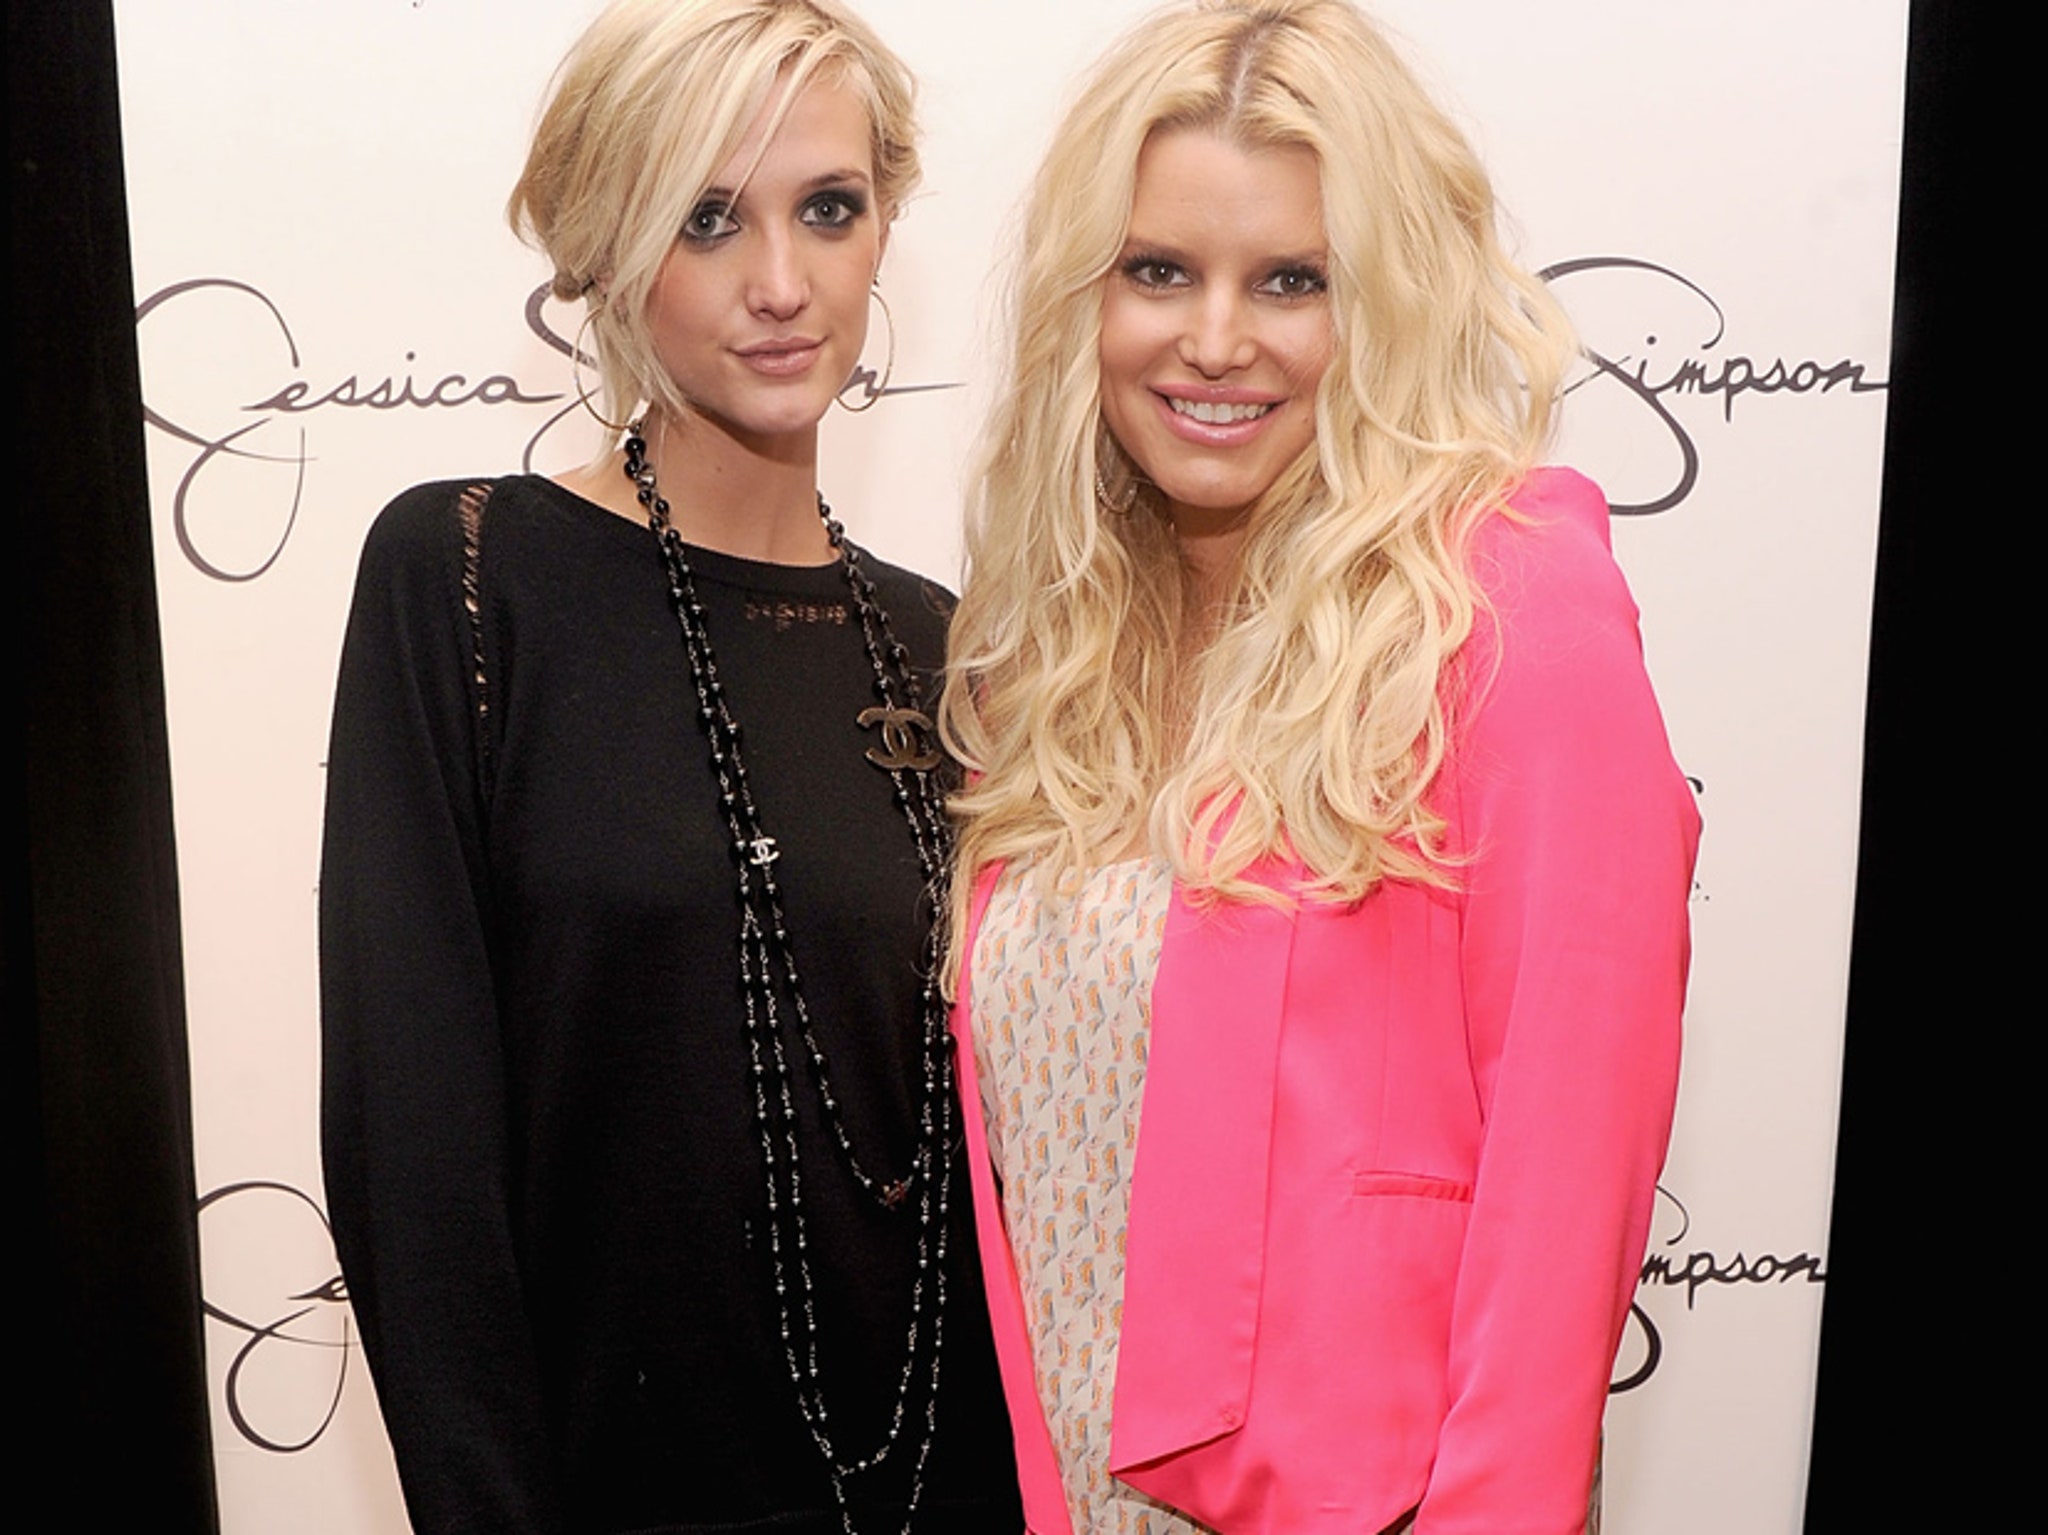 Ashlee Simpson 'disgusted' by media weigh-in on sis – Boston Herald